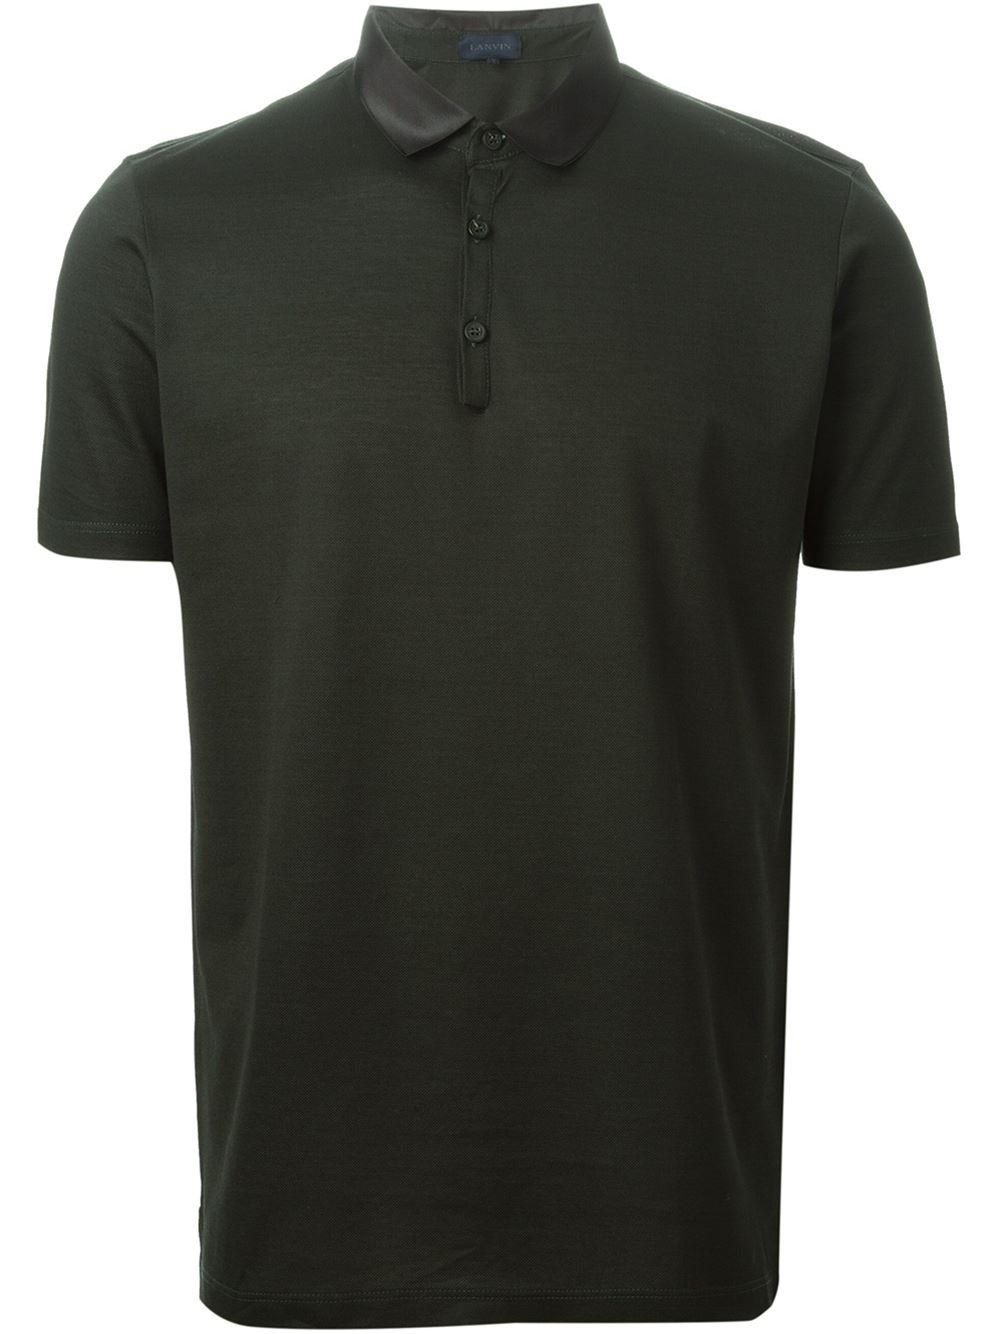 Lanvin Contrasting Satin Collar Polo Shirt in Green for Men - Lyst